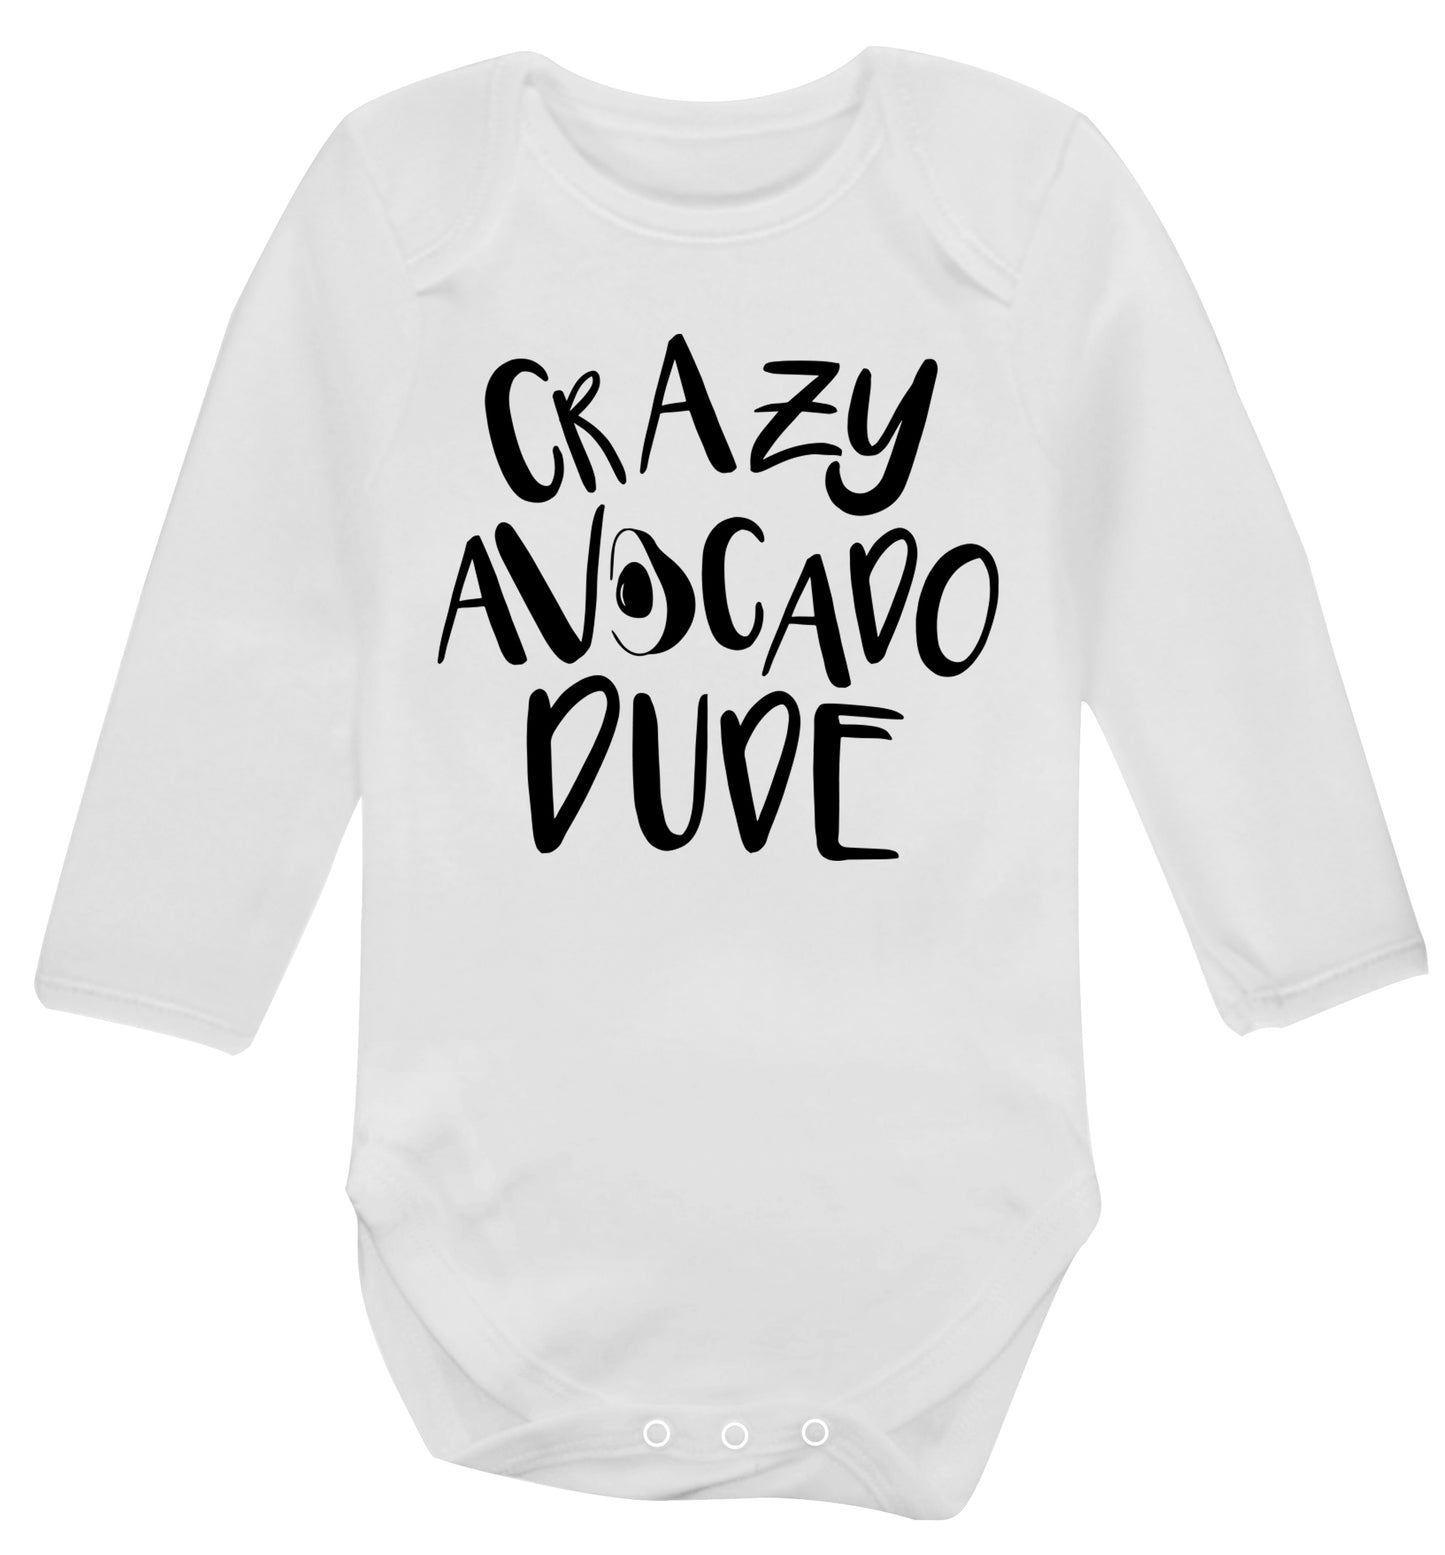 Crazy avocado dude Baby Vest long sleeved white 6-12 months